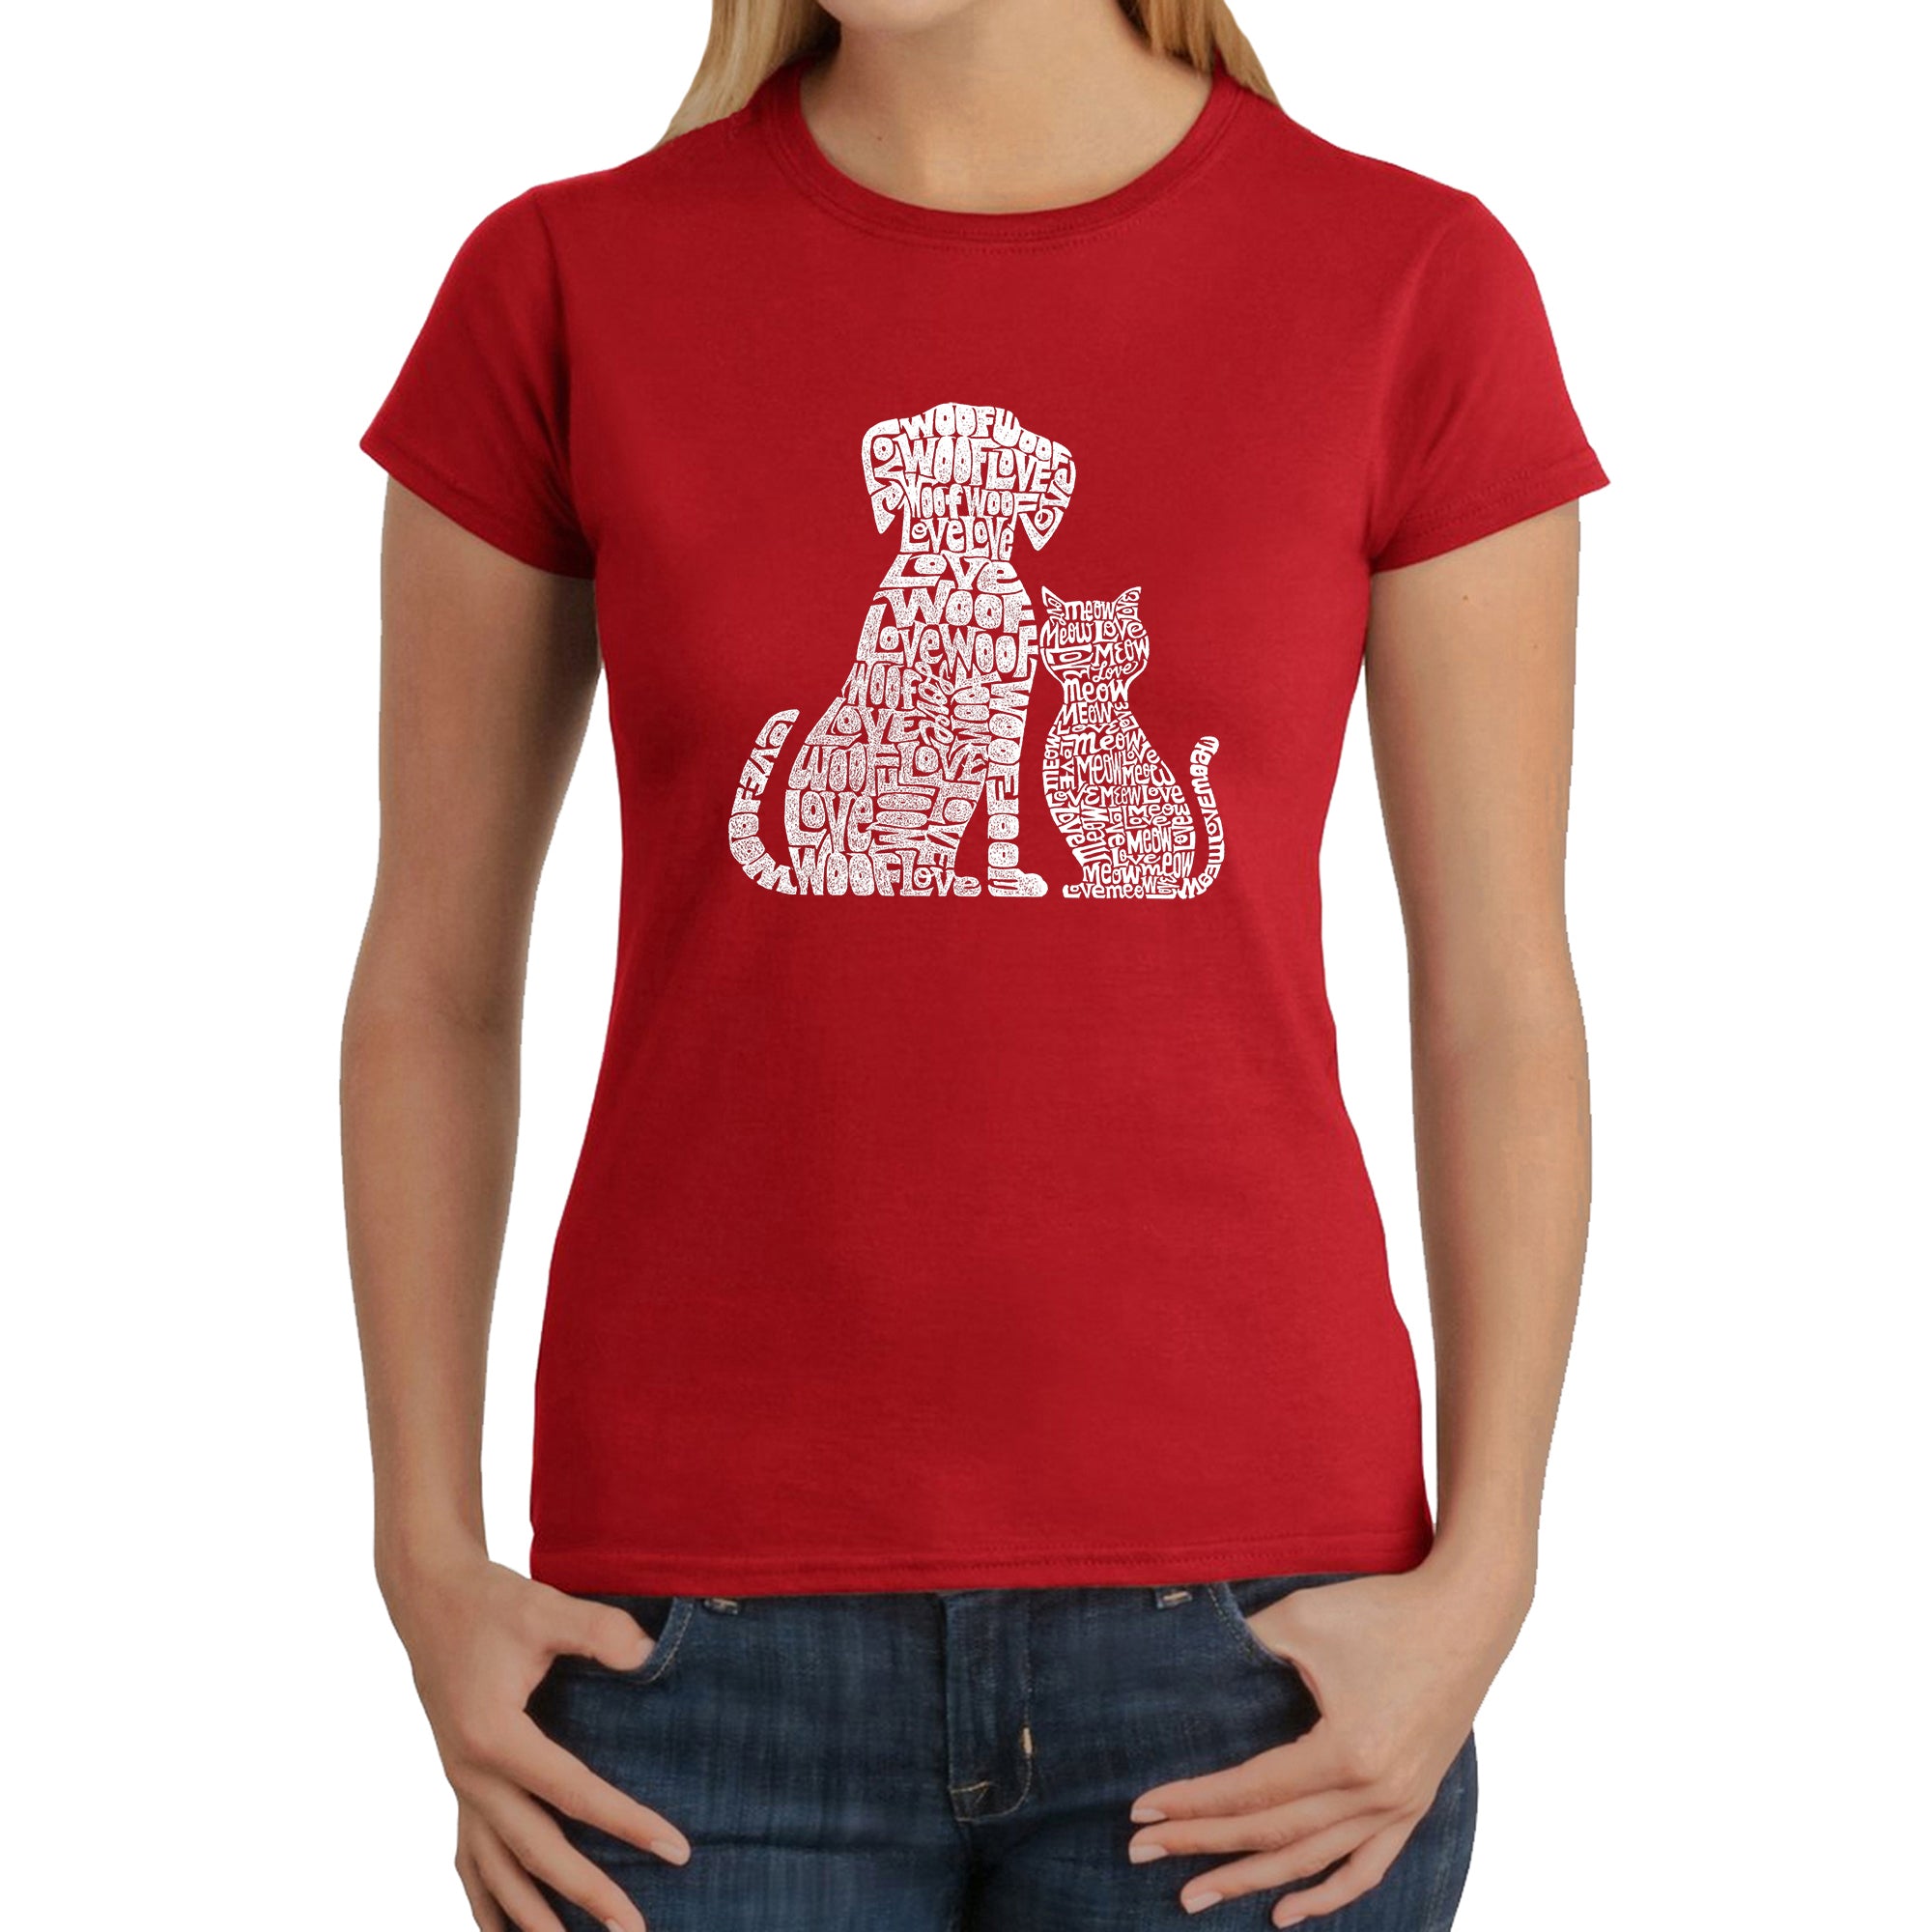 Dogs And Cats - Women's Word Art T-Shirt - Red - XX-Large